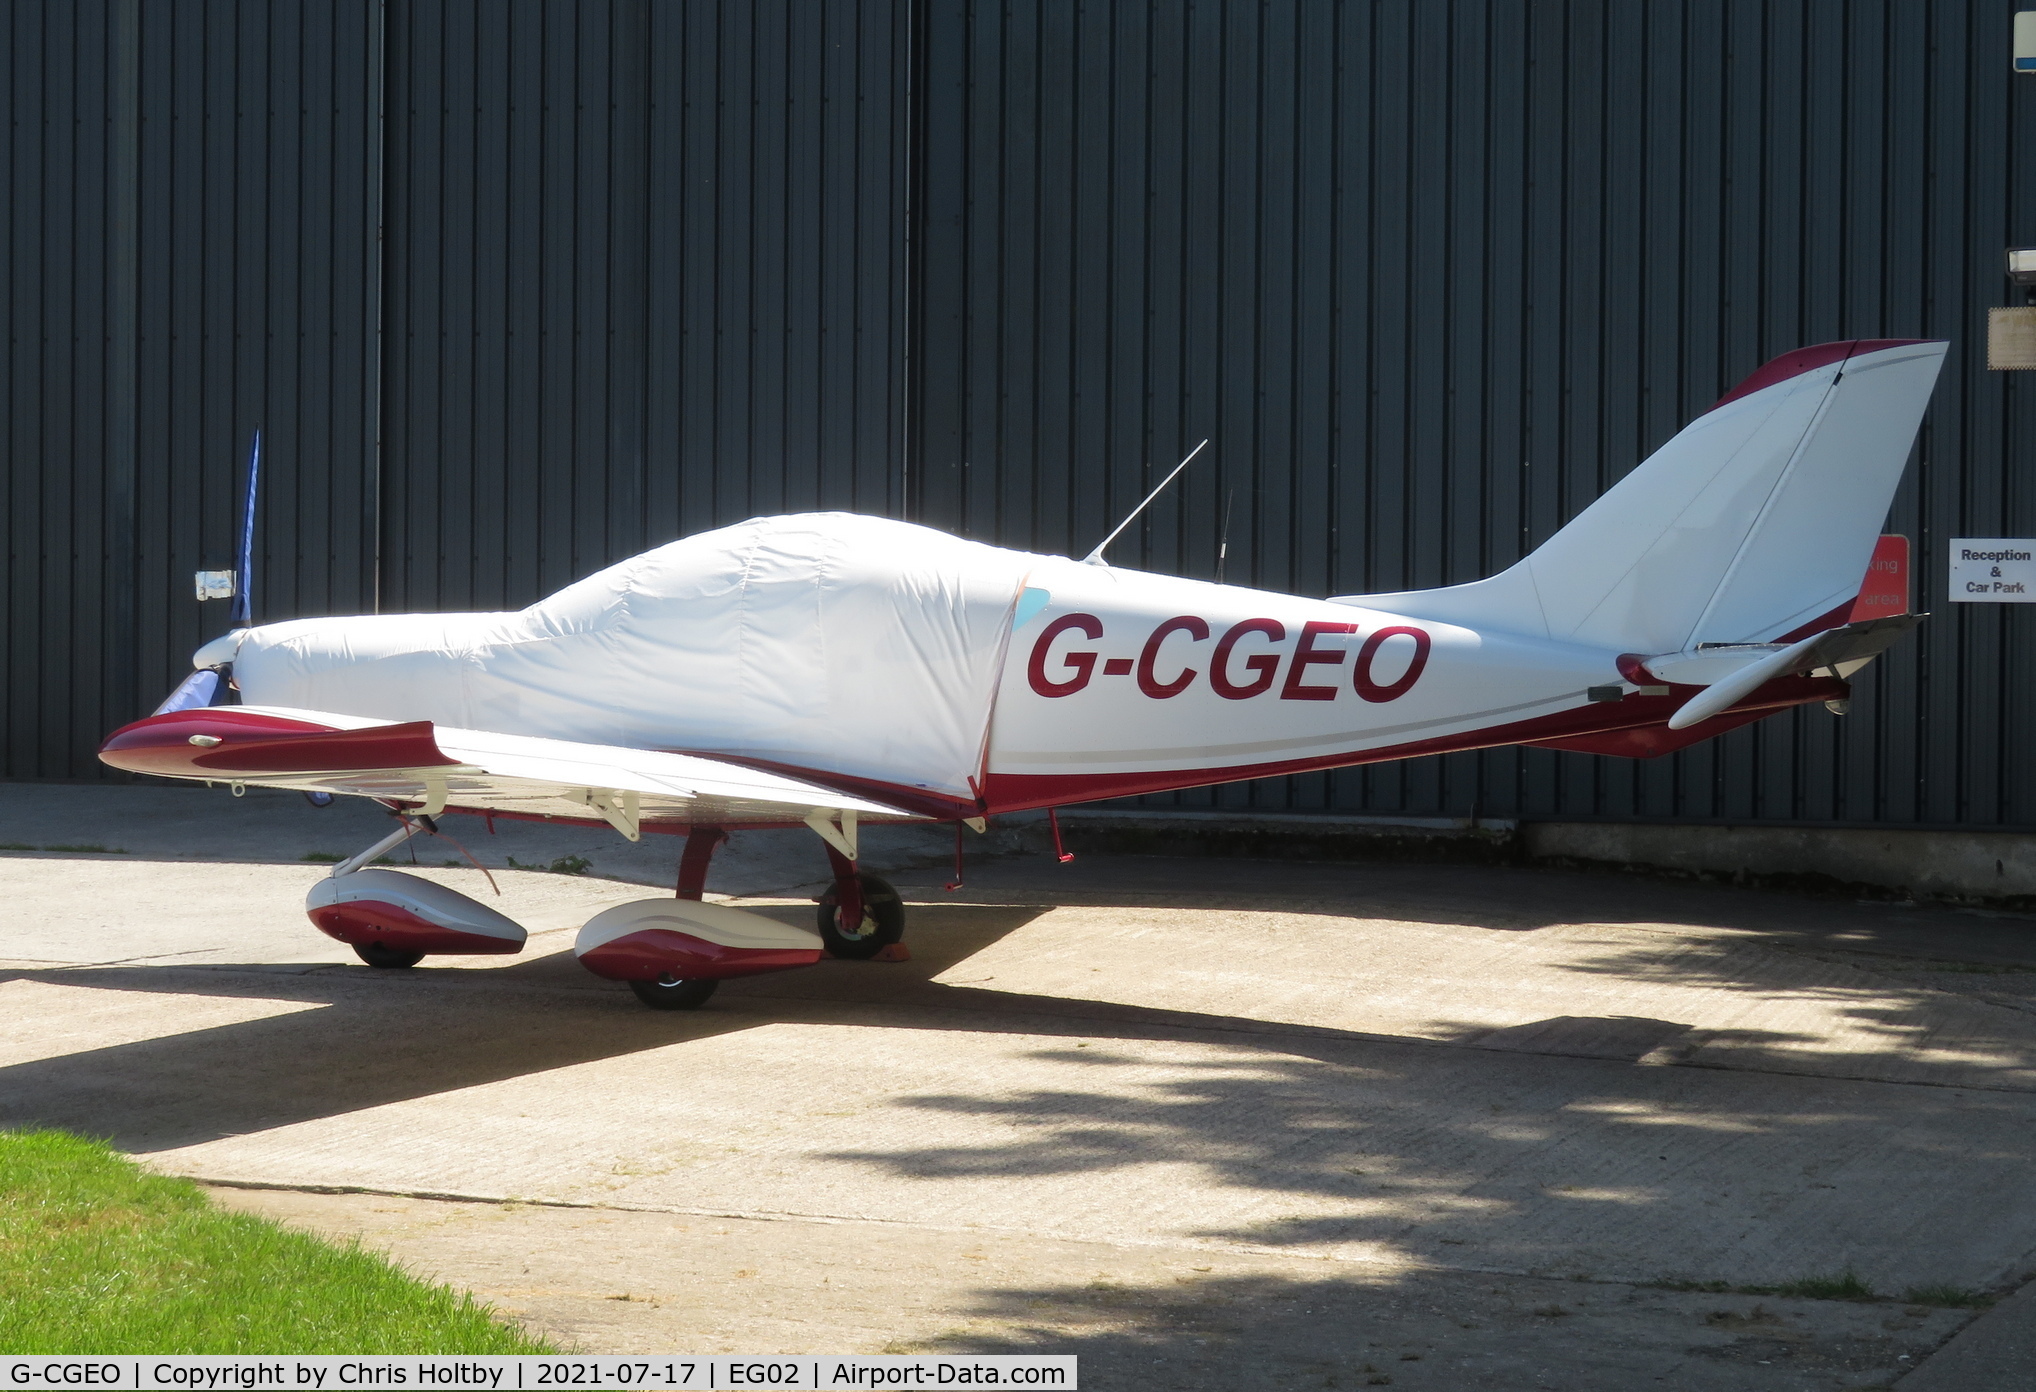 G-CGEO, 2009 CZAW SportCruiser C/N 09SC303, Parked and covered outside the hangar at Audley End, Essex